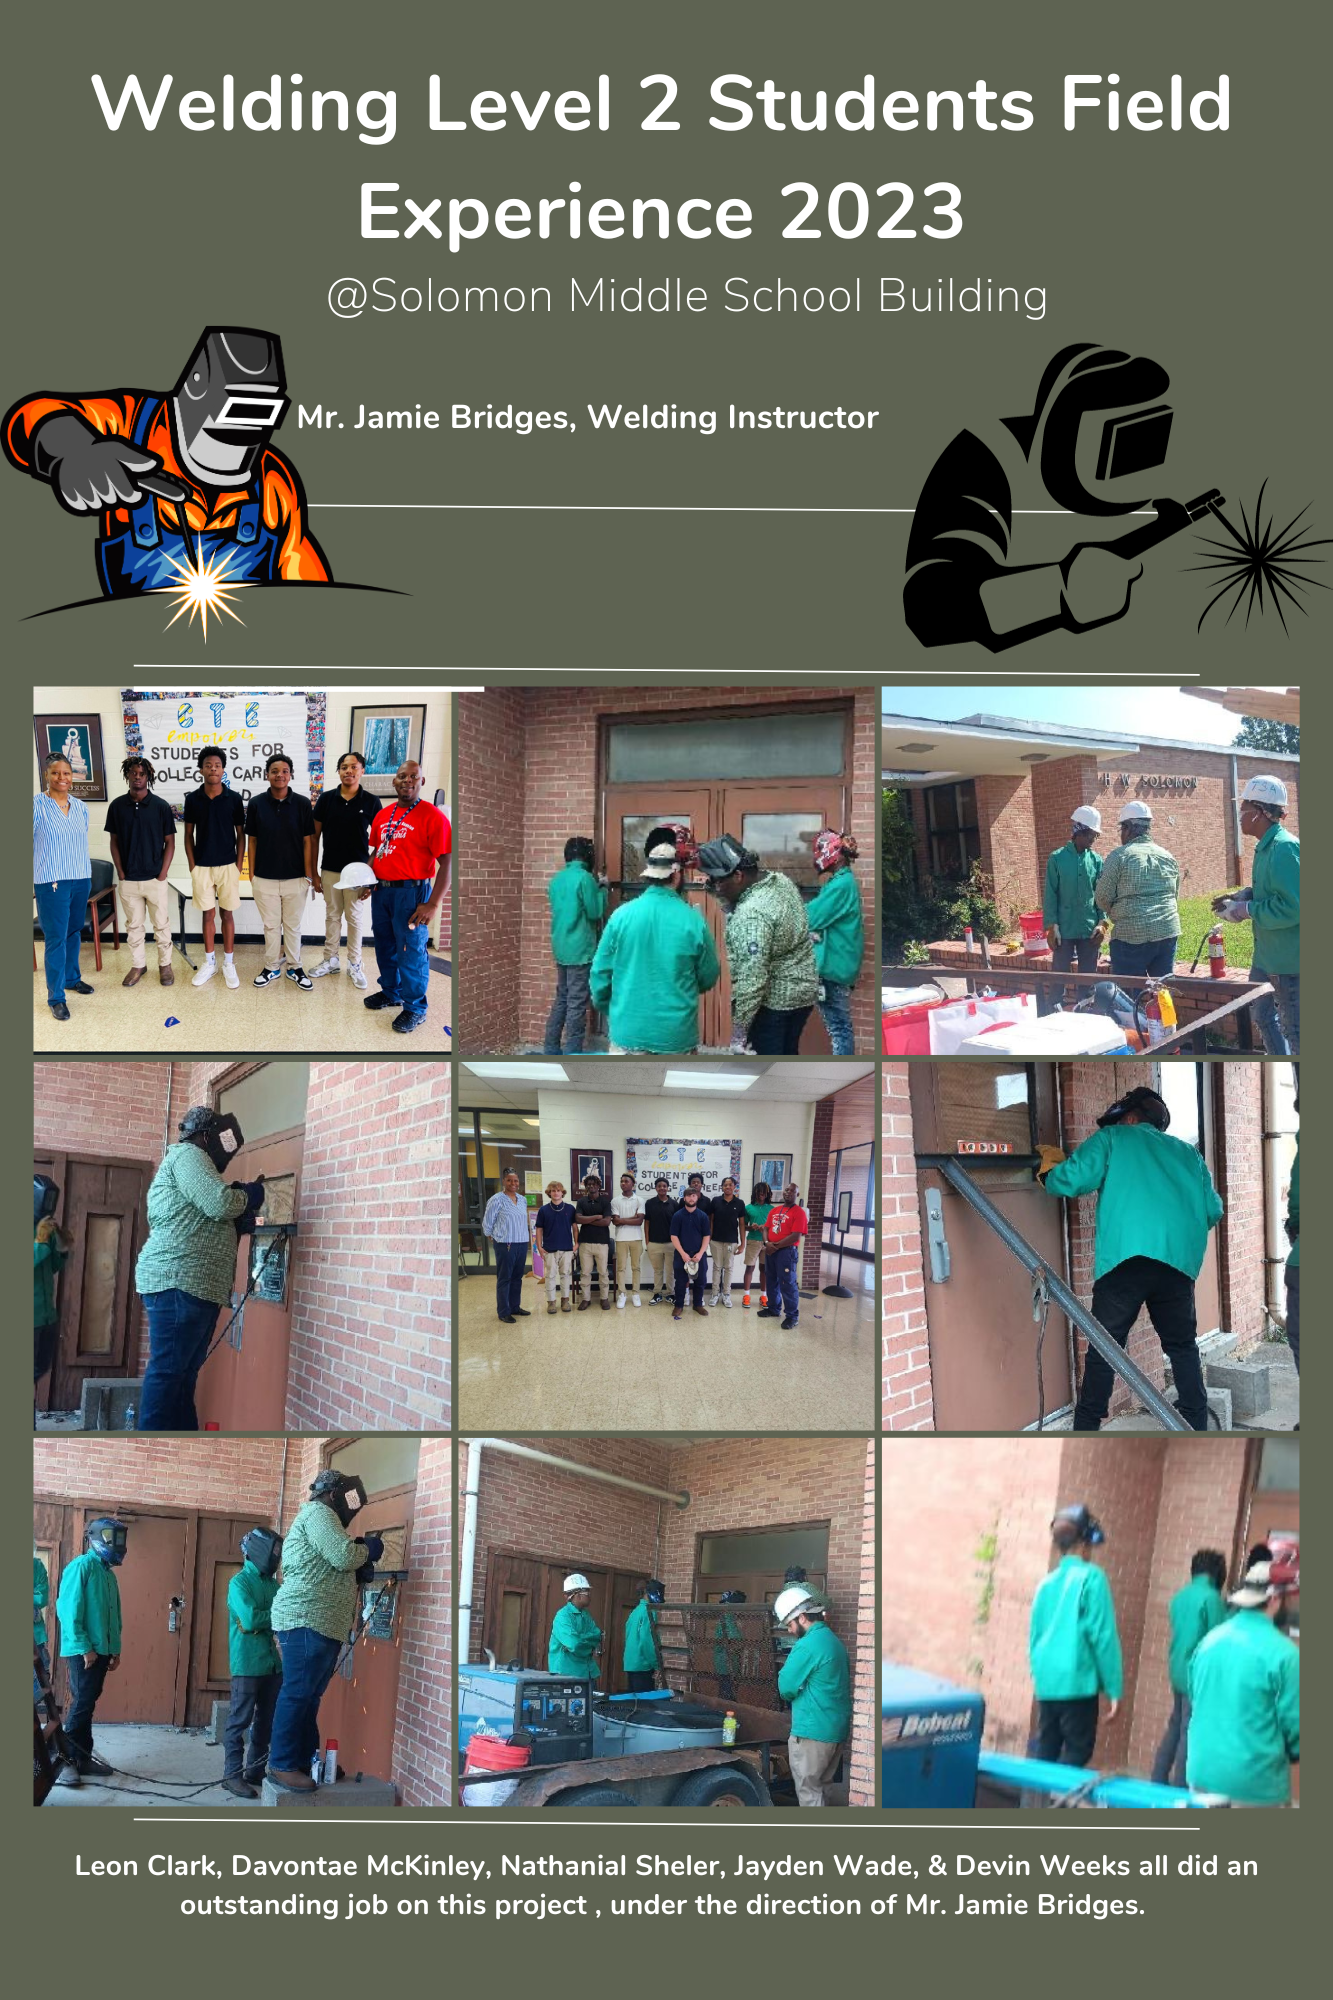 Welding Level 2 Students Field Experience 2023 at Solomon Middle School Building. Mr. Jamie Bridges, Welding Instructor. Leon Clark, Davontae McKinley, Nathanial Sheler, Jayden Wade & Devin Weeks all did an outstanding job on this project, under the direction of Mr. Jamie Bridges.